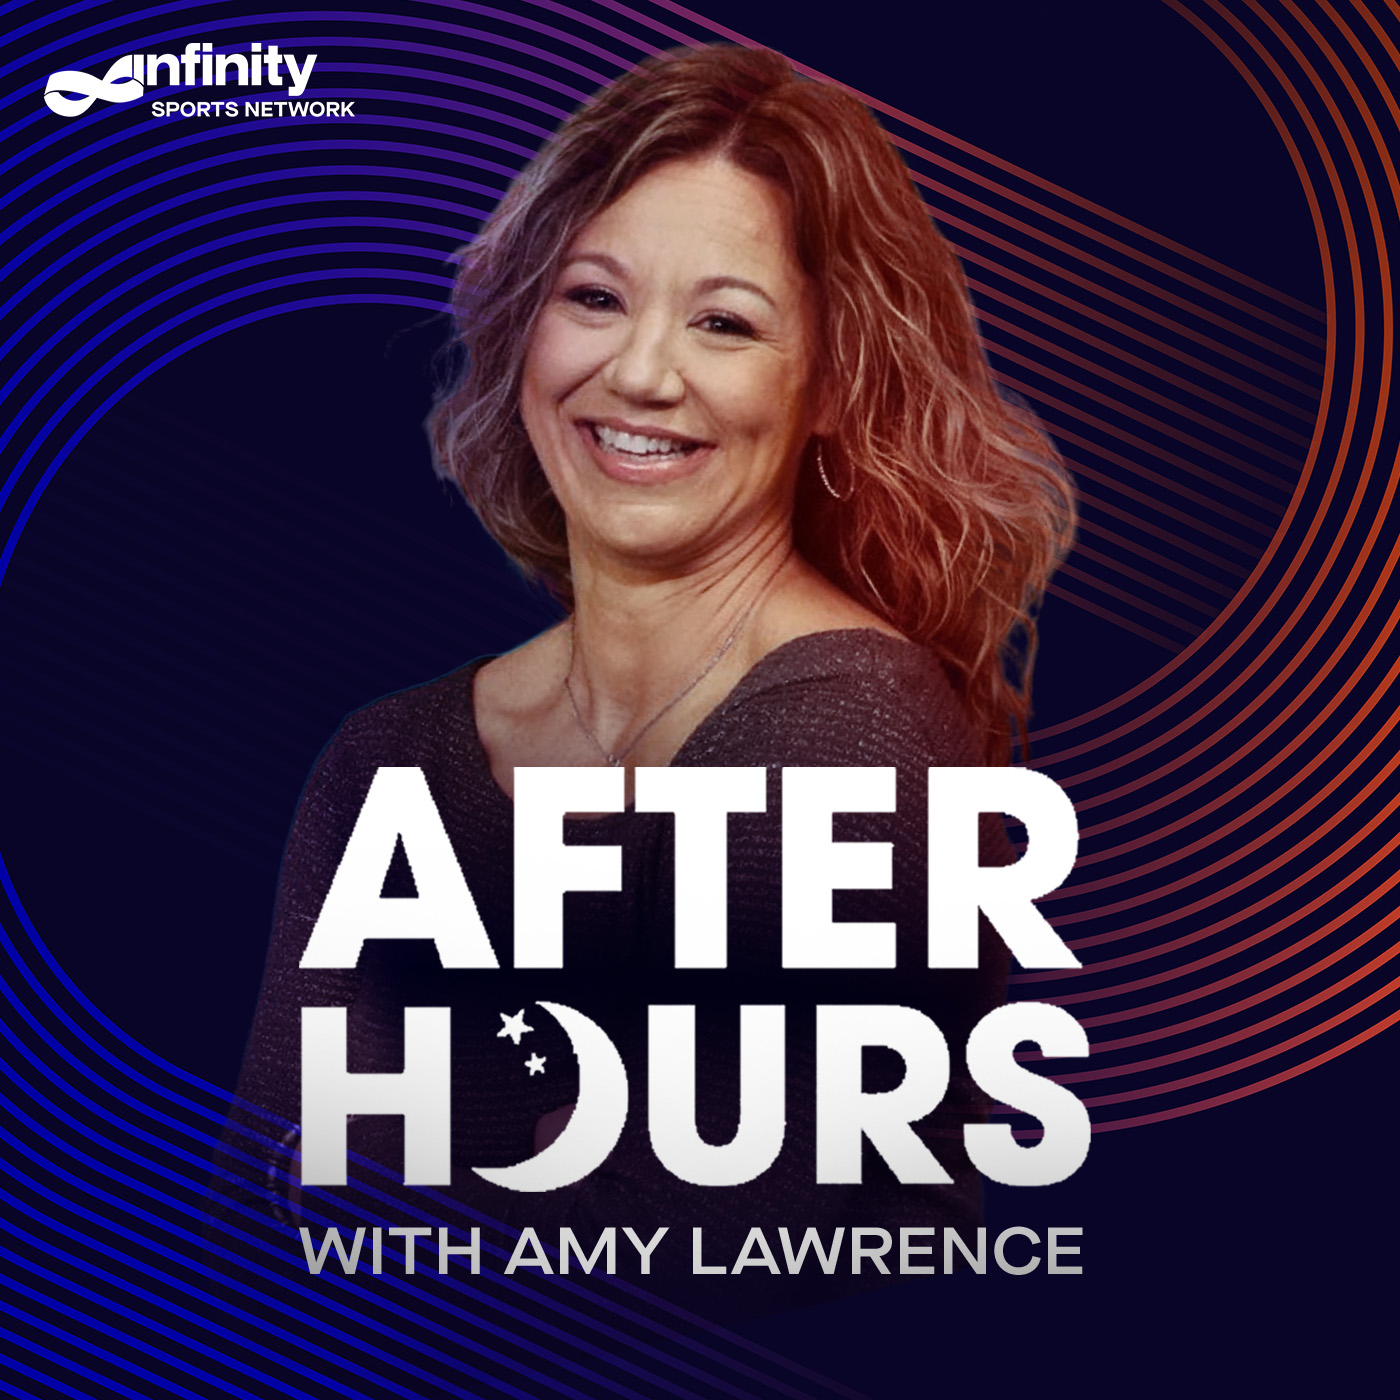 12-8-21 After Hours with Amy Lawrence PODCAST: Hour 1